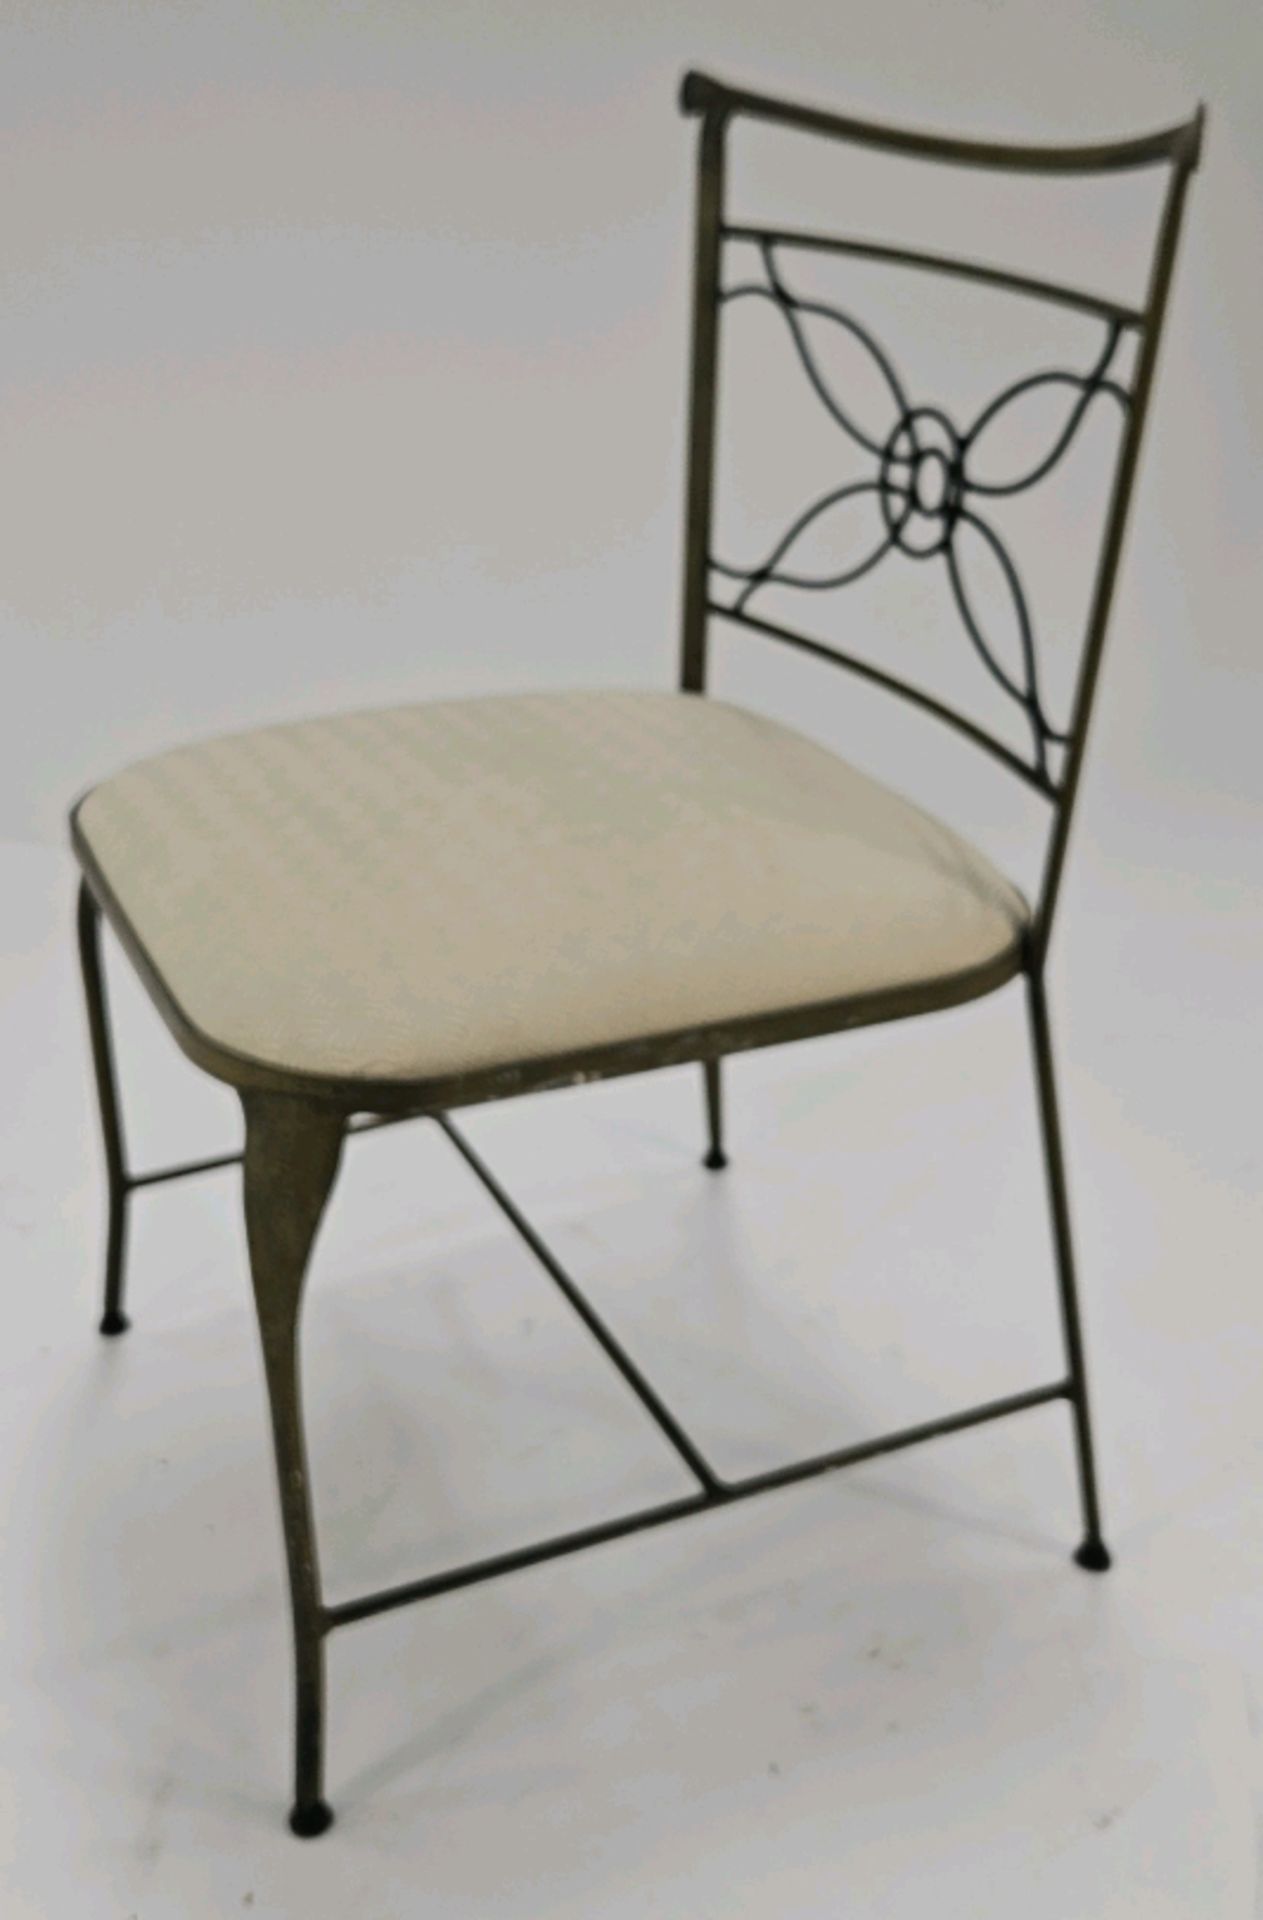 Rene Prou Dining Chair - Image 3 of 3